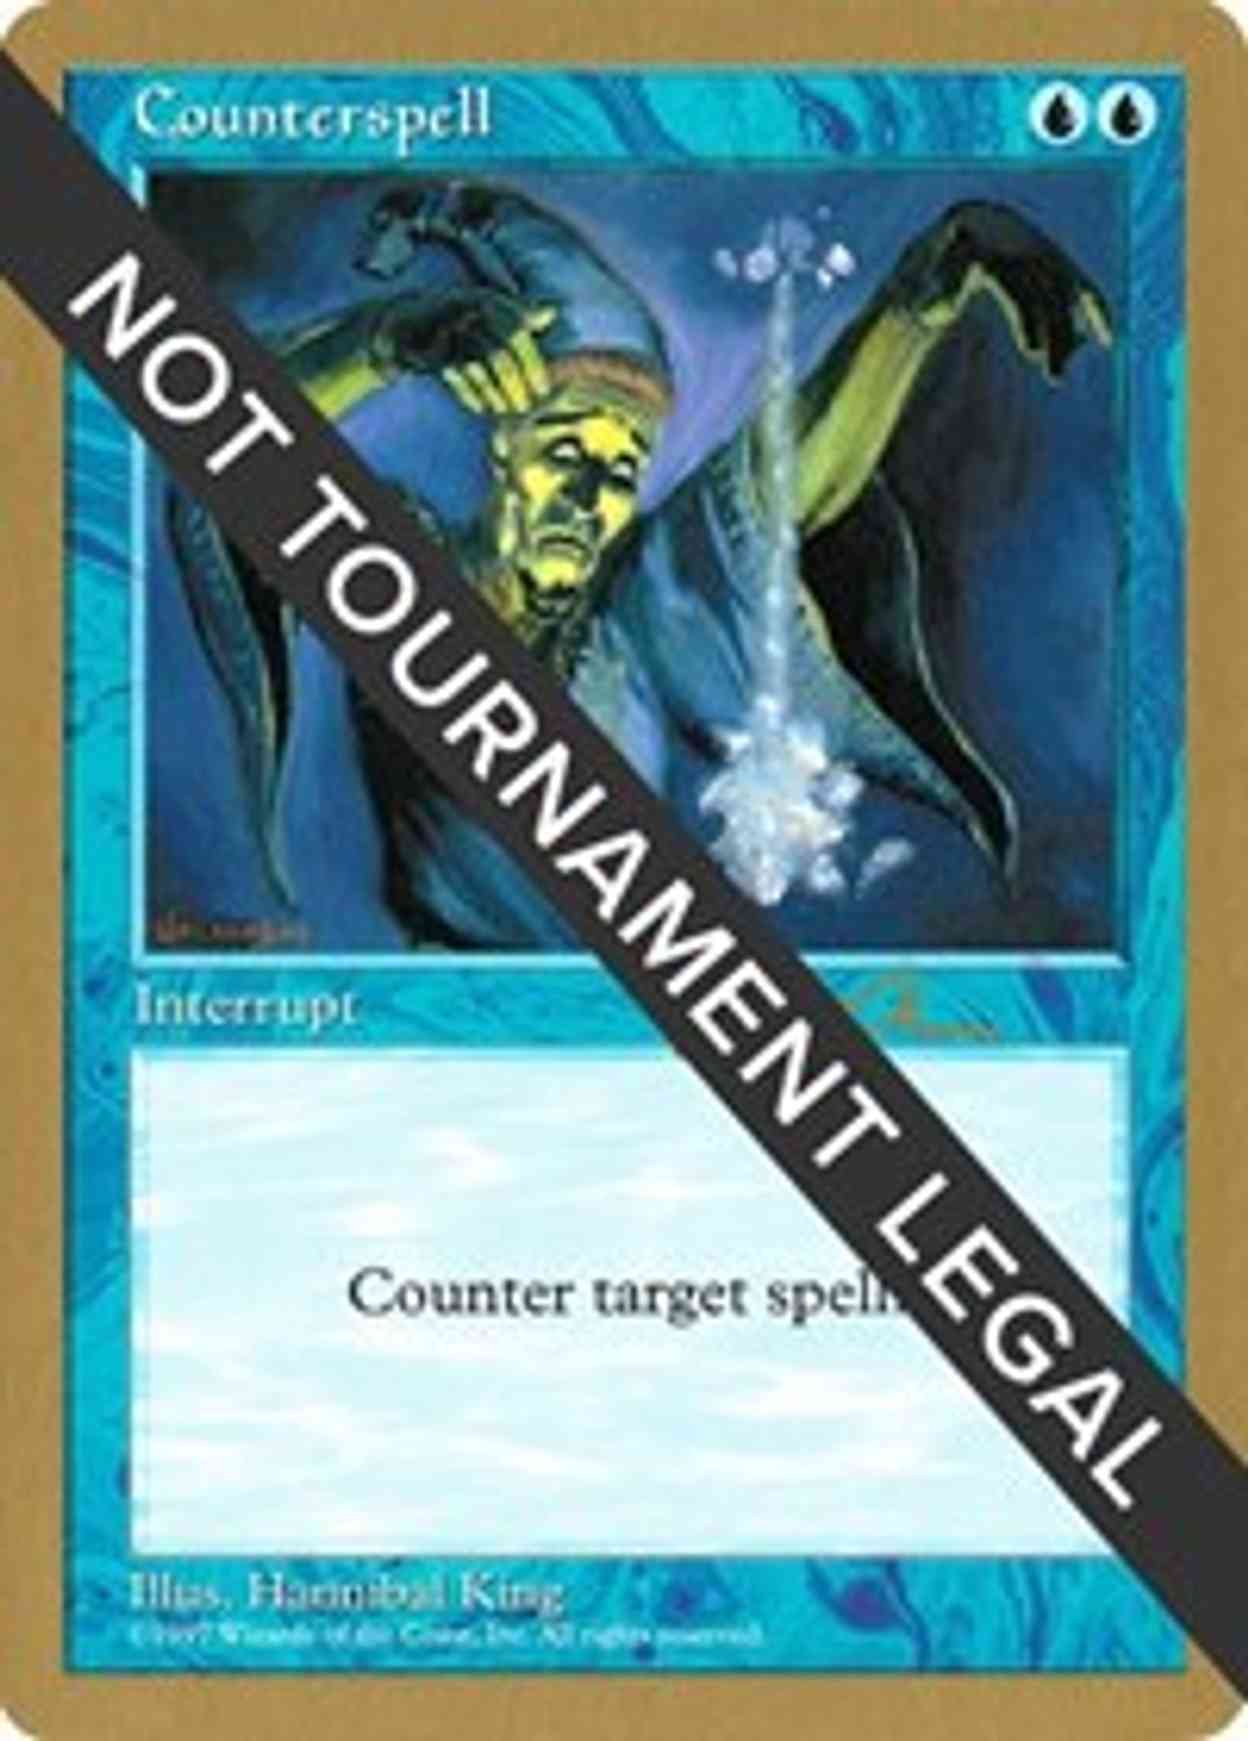 Counterspell - 1997 Paul McCabe (5ED) magic card front